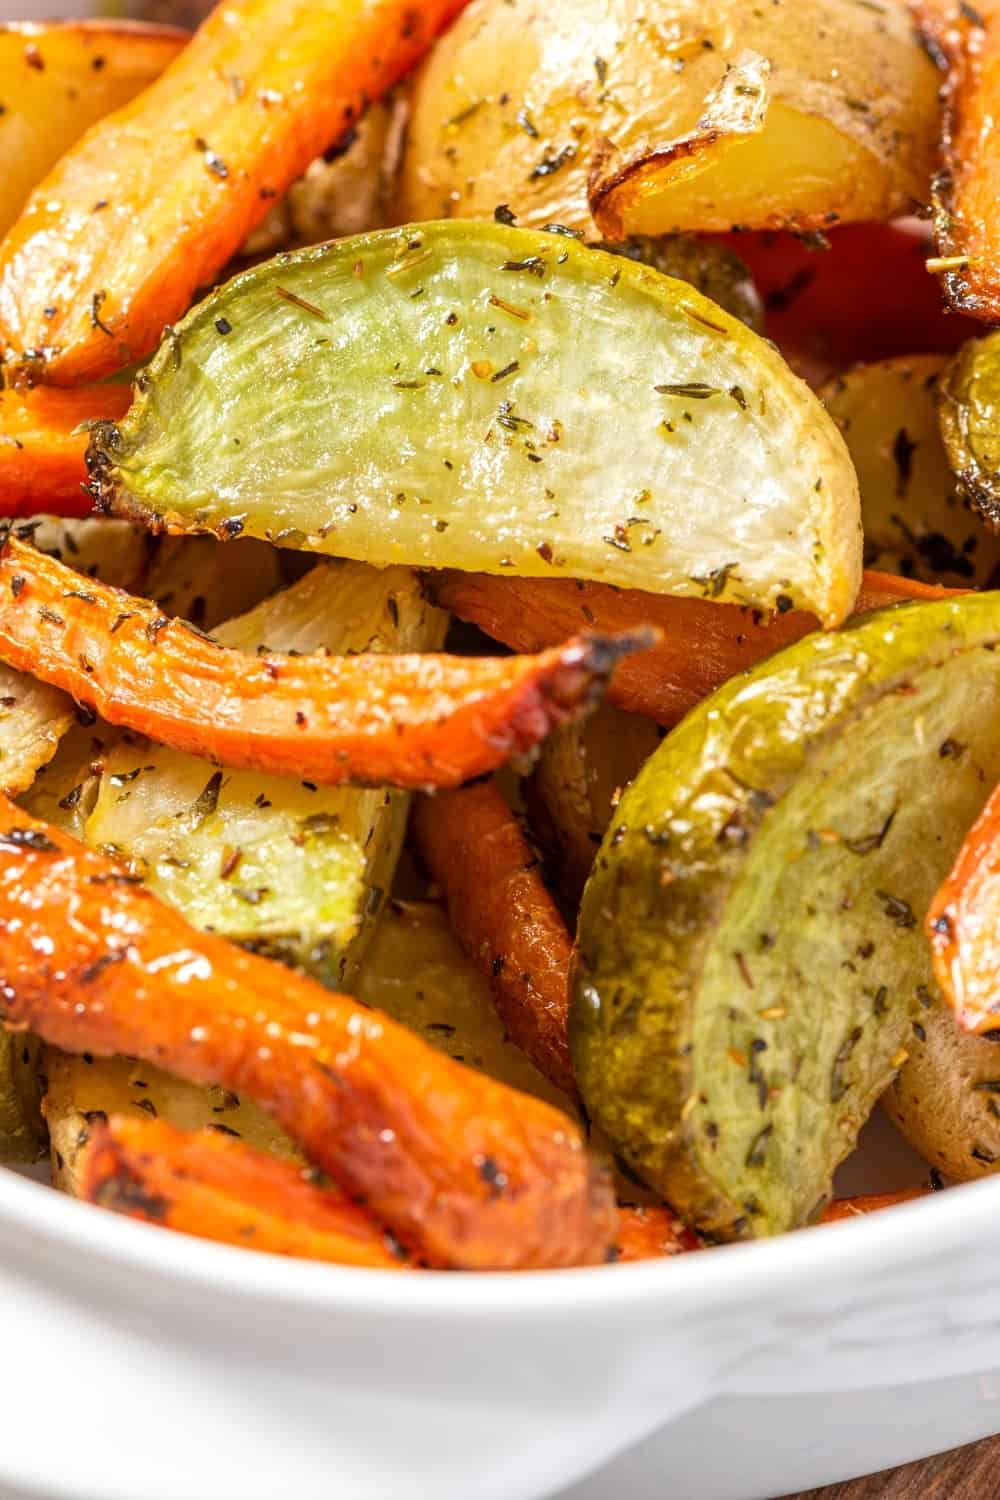 Baked vegetables in a white baking dish close-up. Fried potatoes, carrots and turnips with olive oil